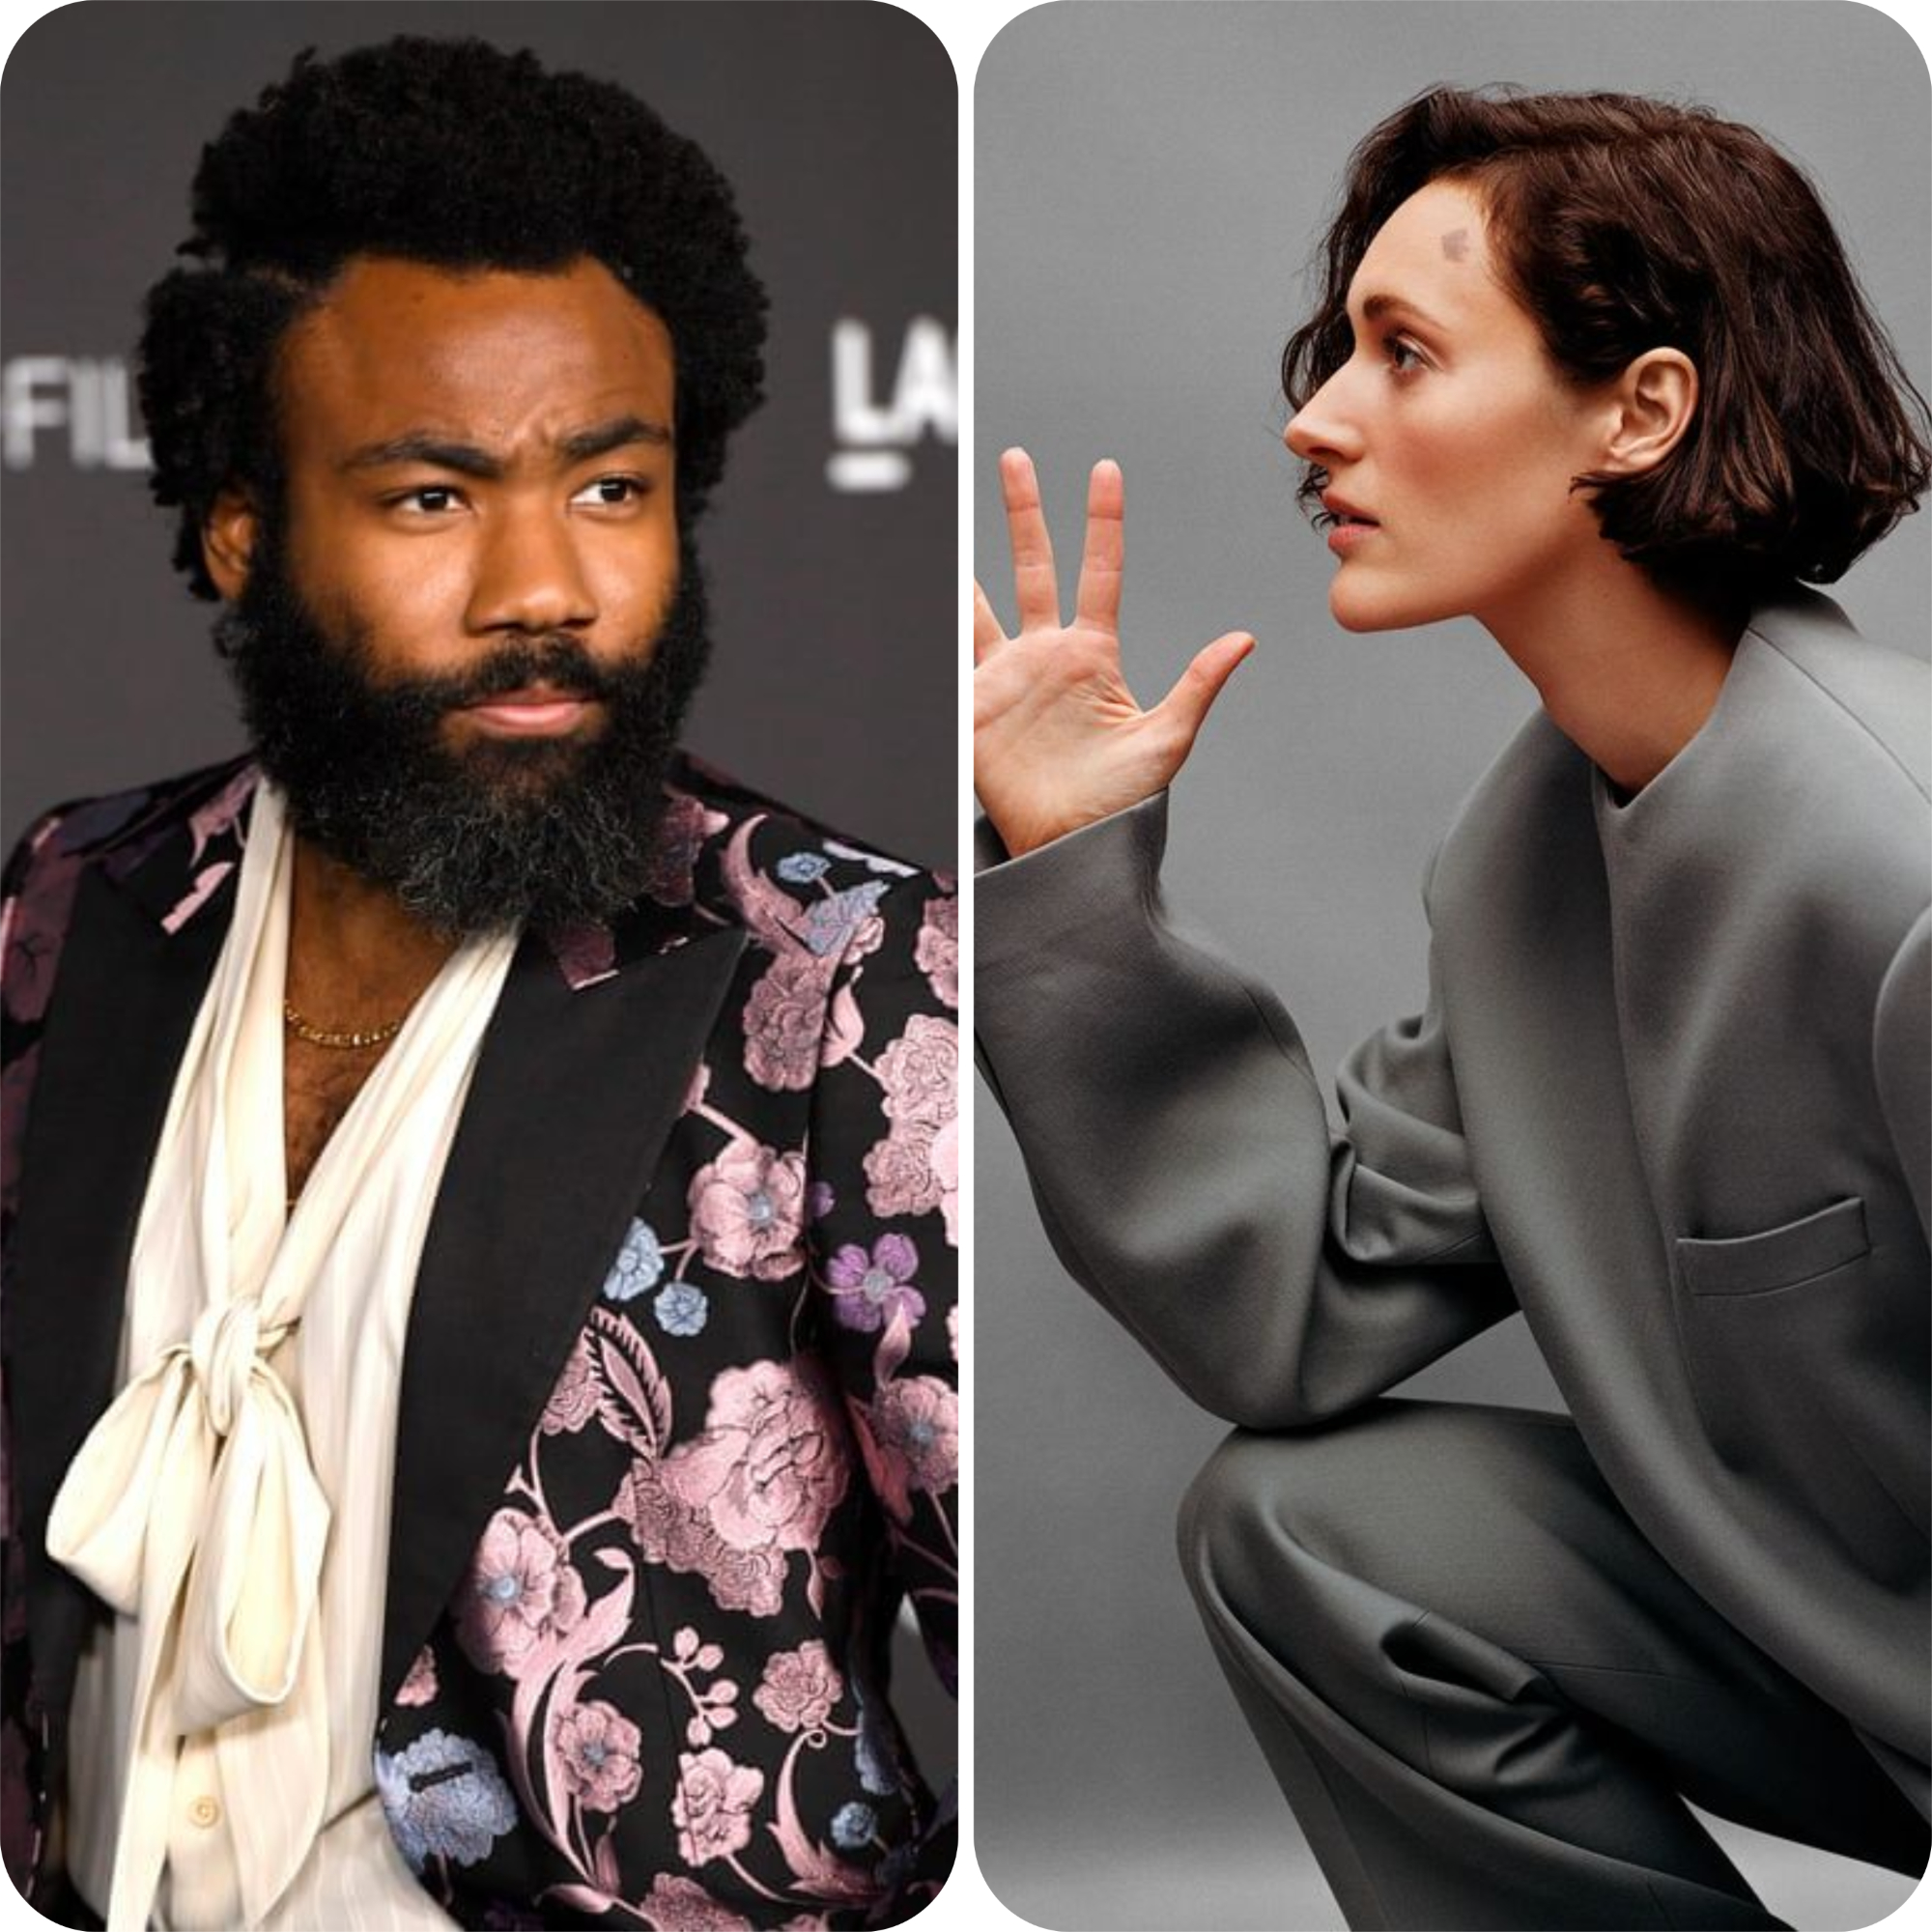 Donald Glover is opening up about his professional “divorce” from Phoebe Waller-Bridge